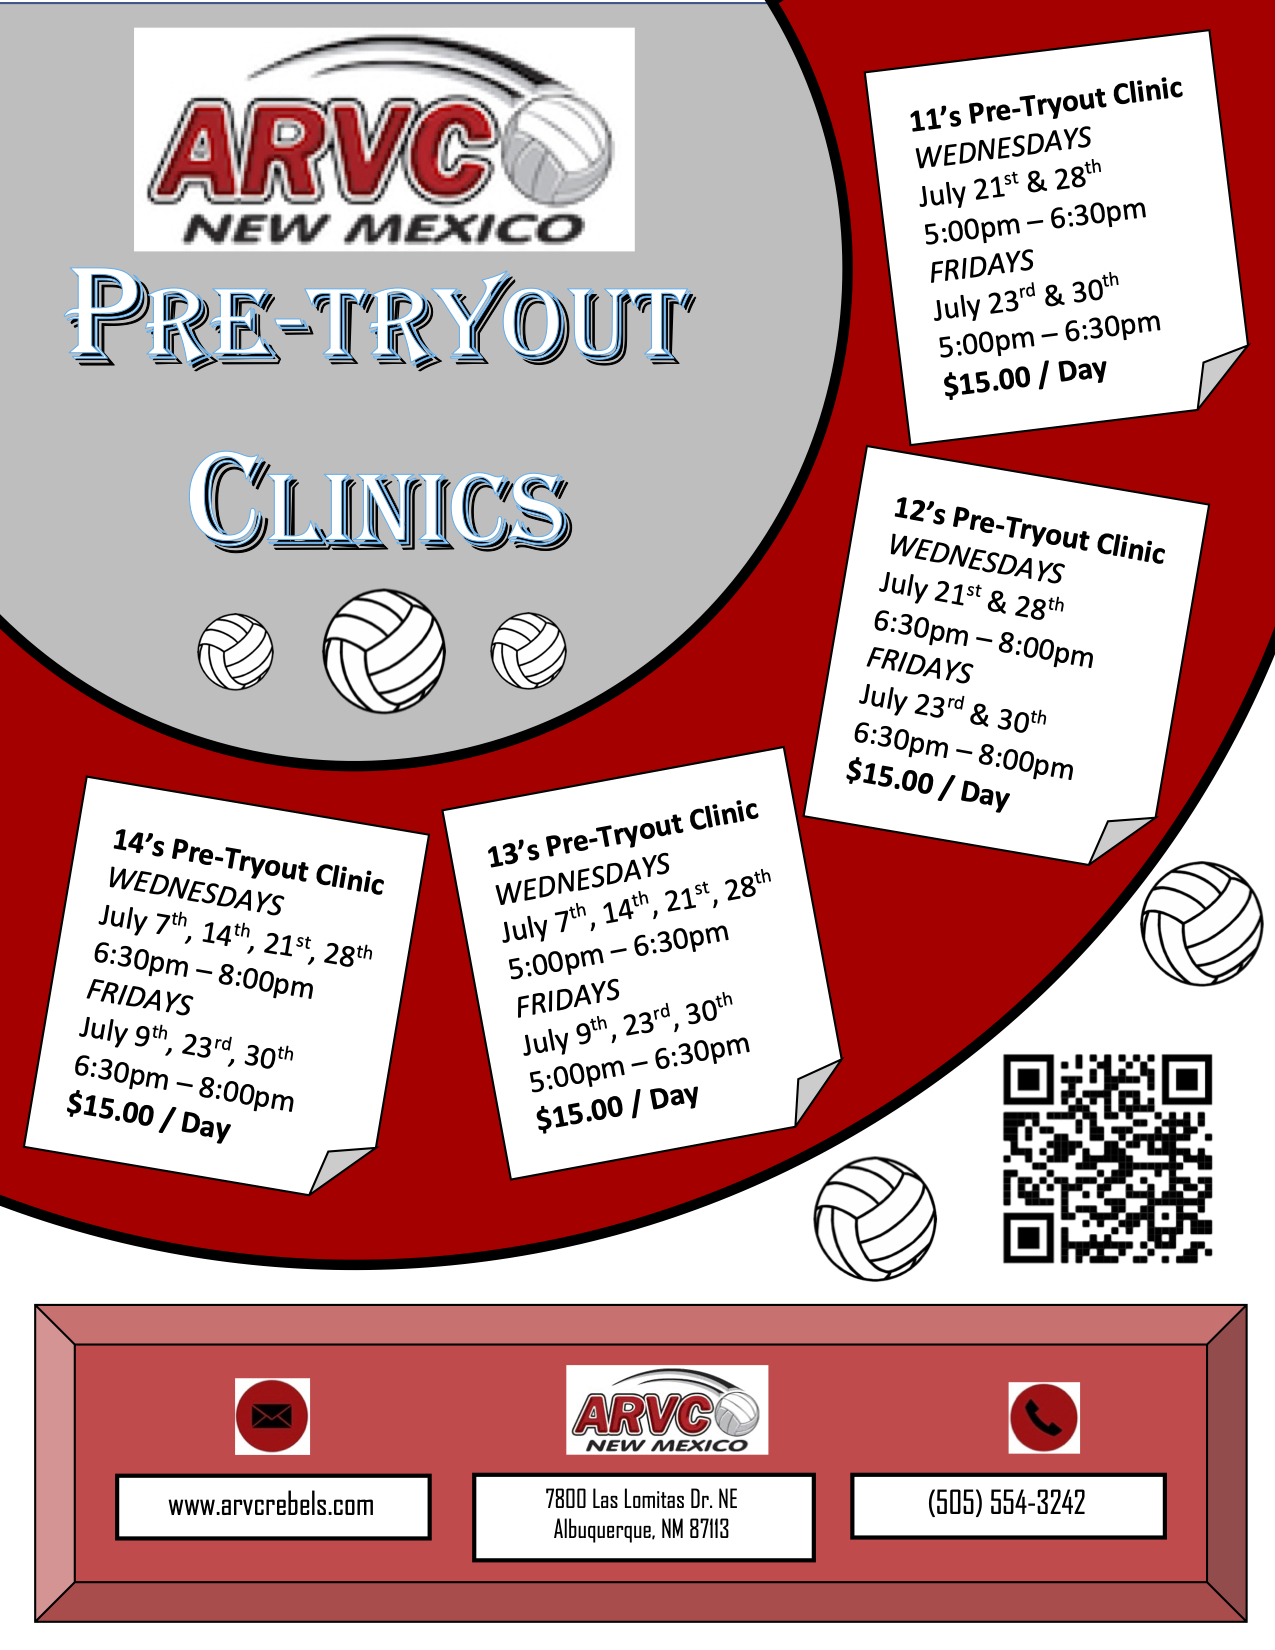 Pre-Tryout Clinics